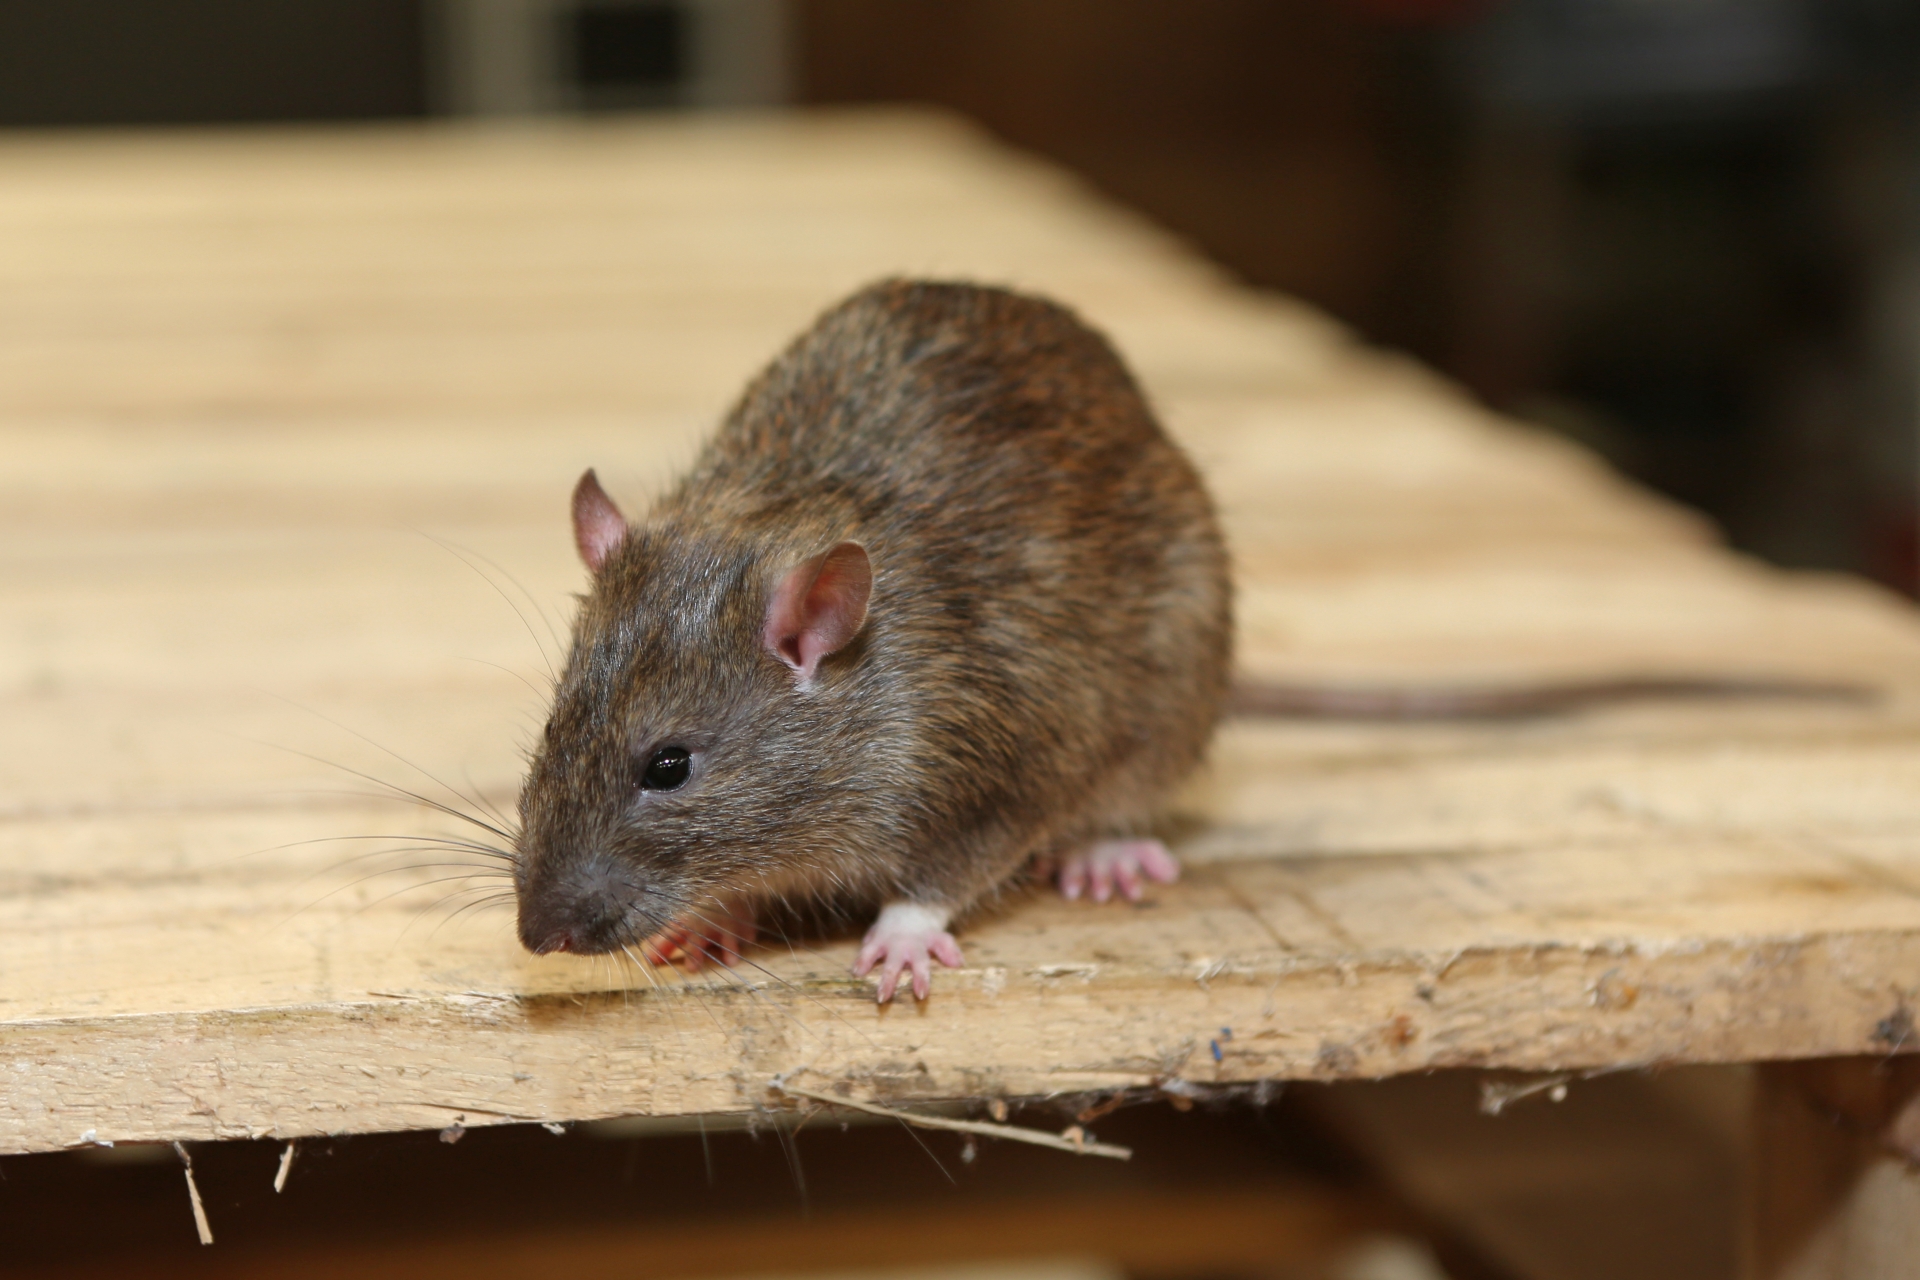 Rat extermination, Pest Control in Orpington, Chelsfield, Downe, BR6. Call Now 020 8166 9746